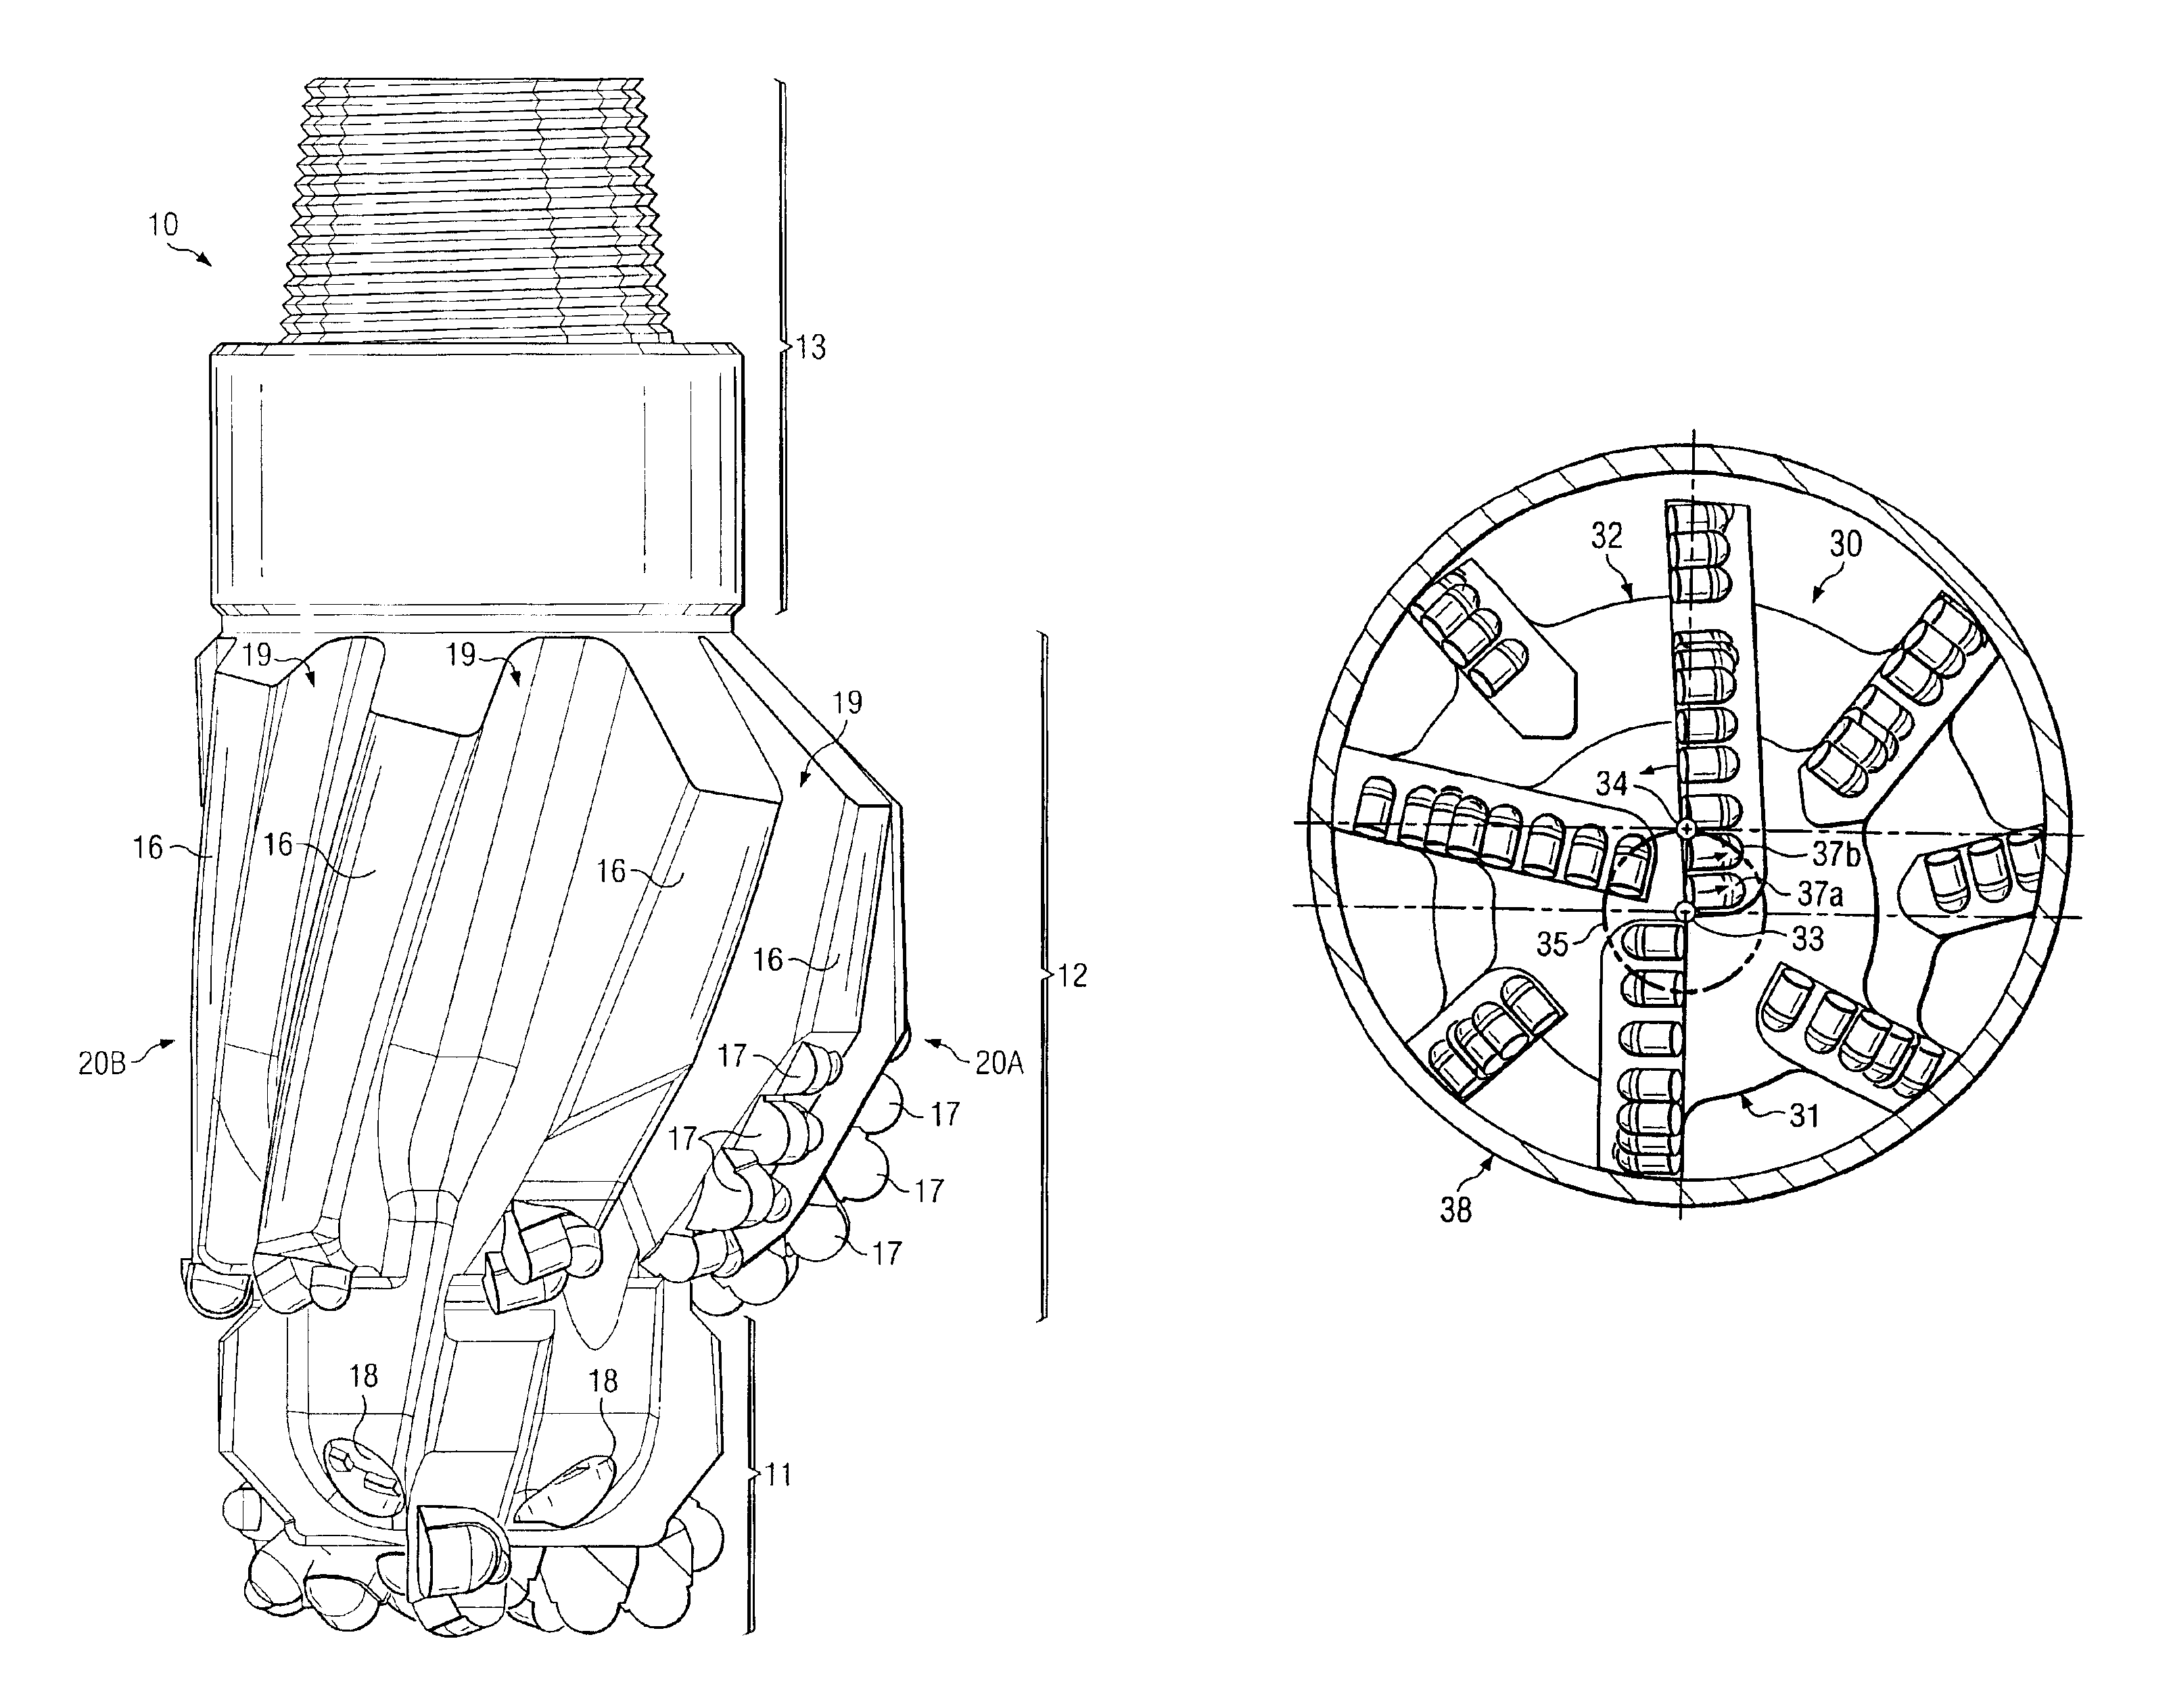 Drill out bi-center bit and method for using same